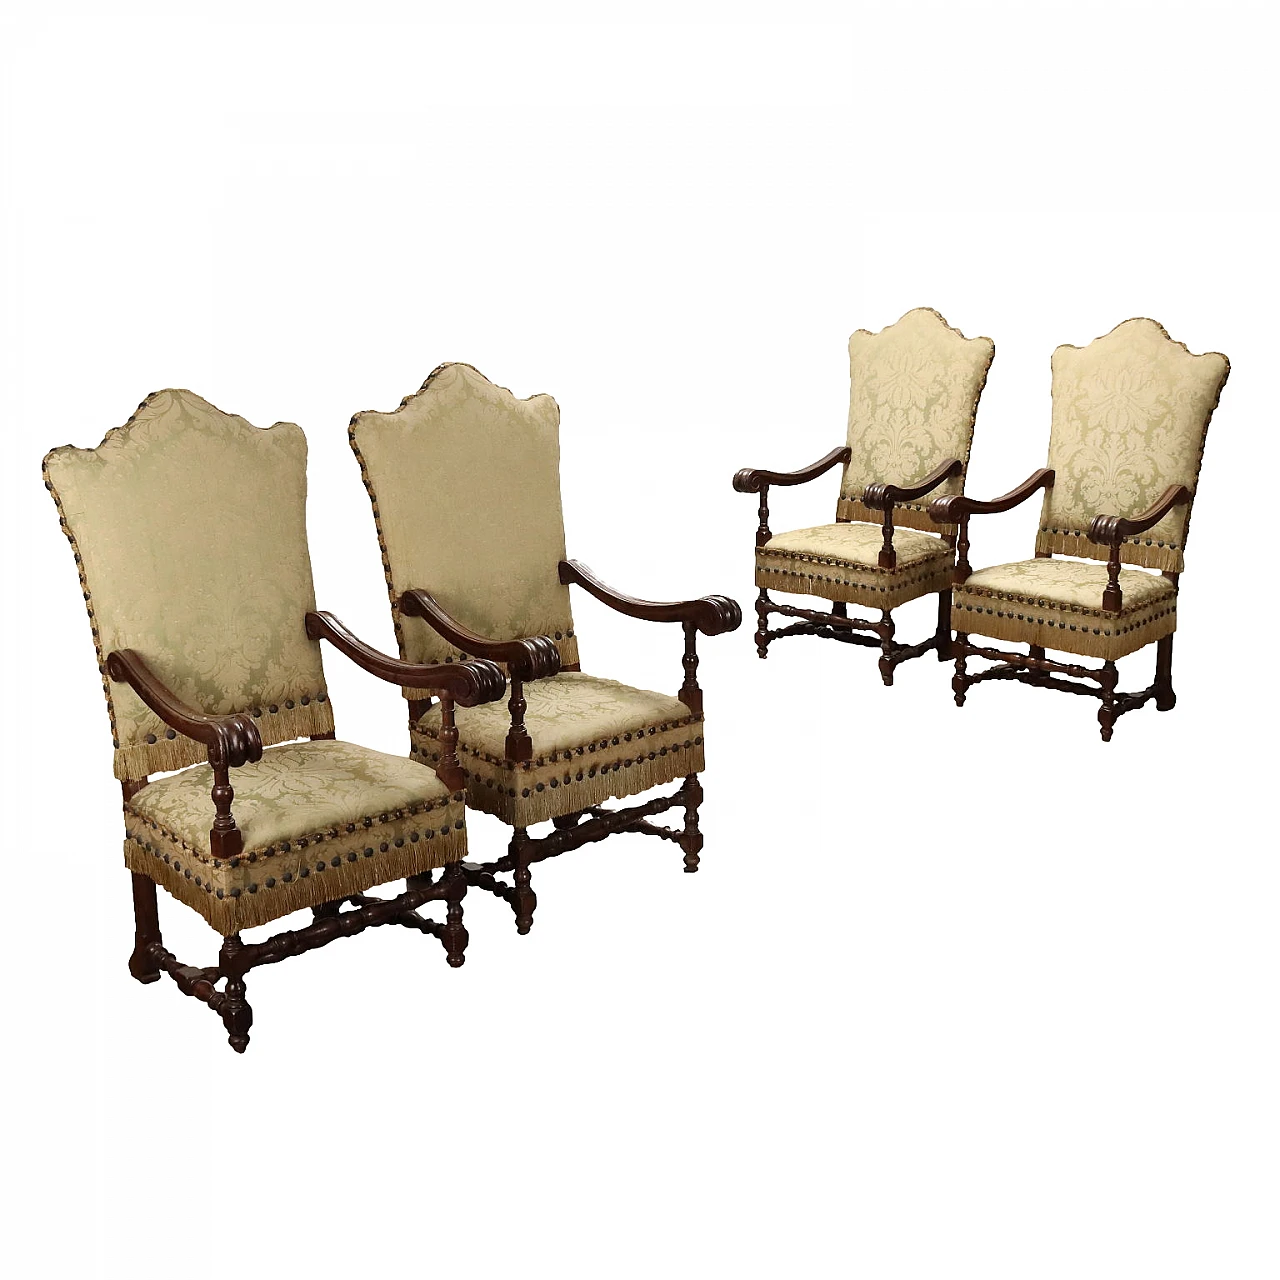 4 Carved wooden chairs, padded with brocade fabric, 19th century 1